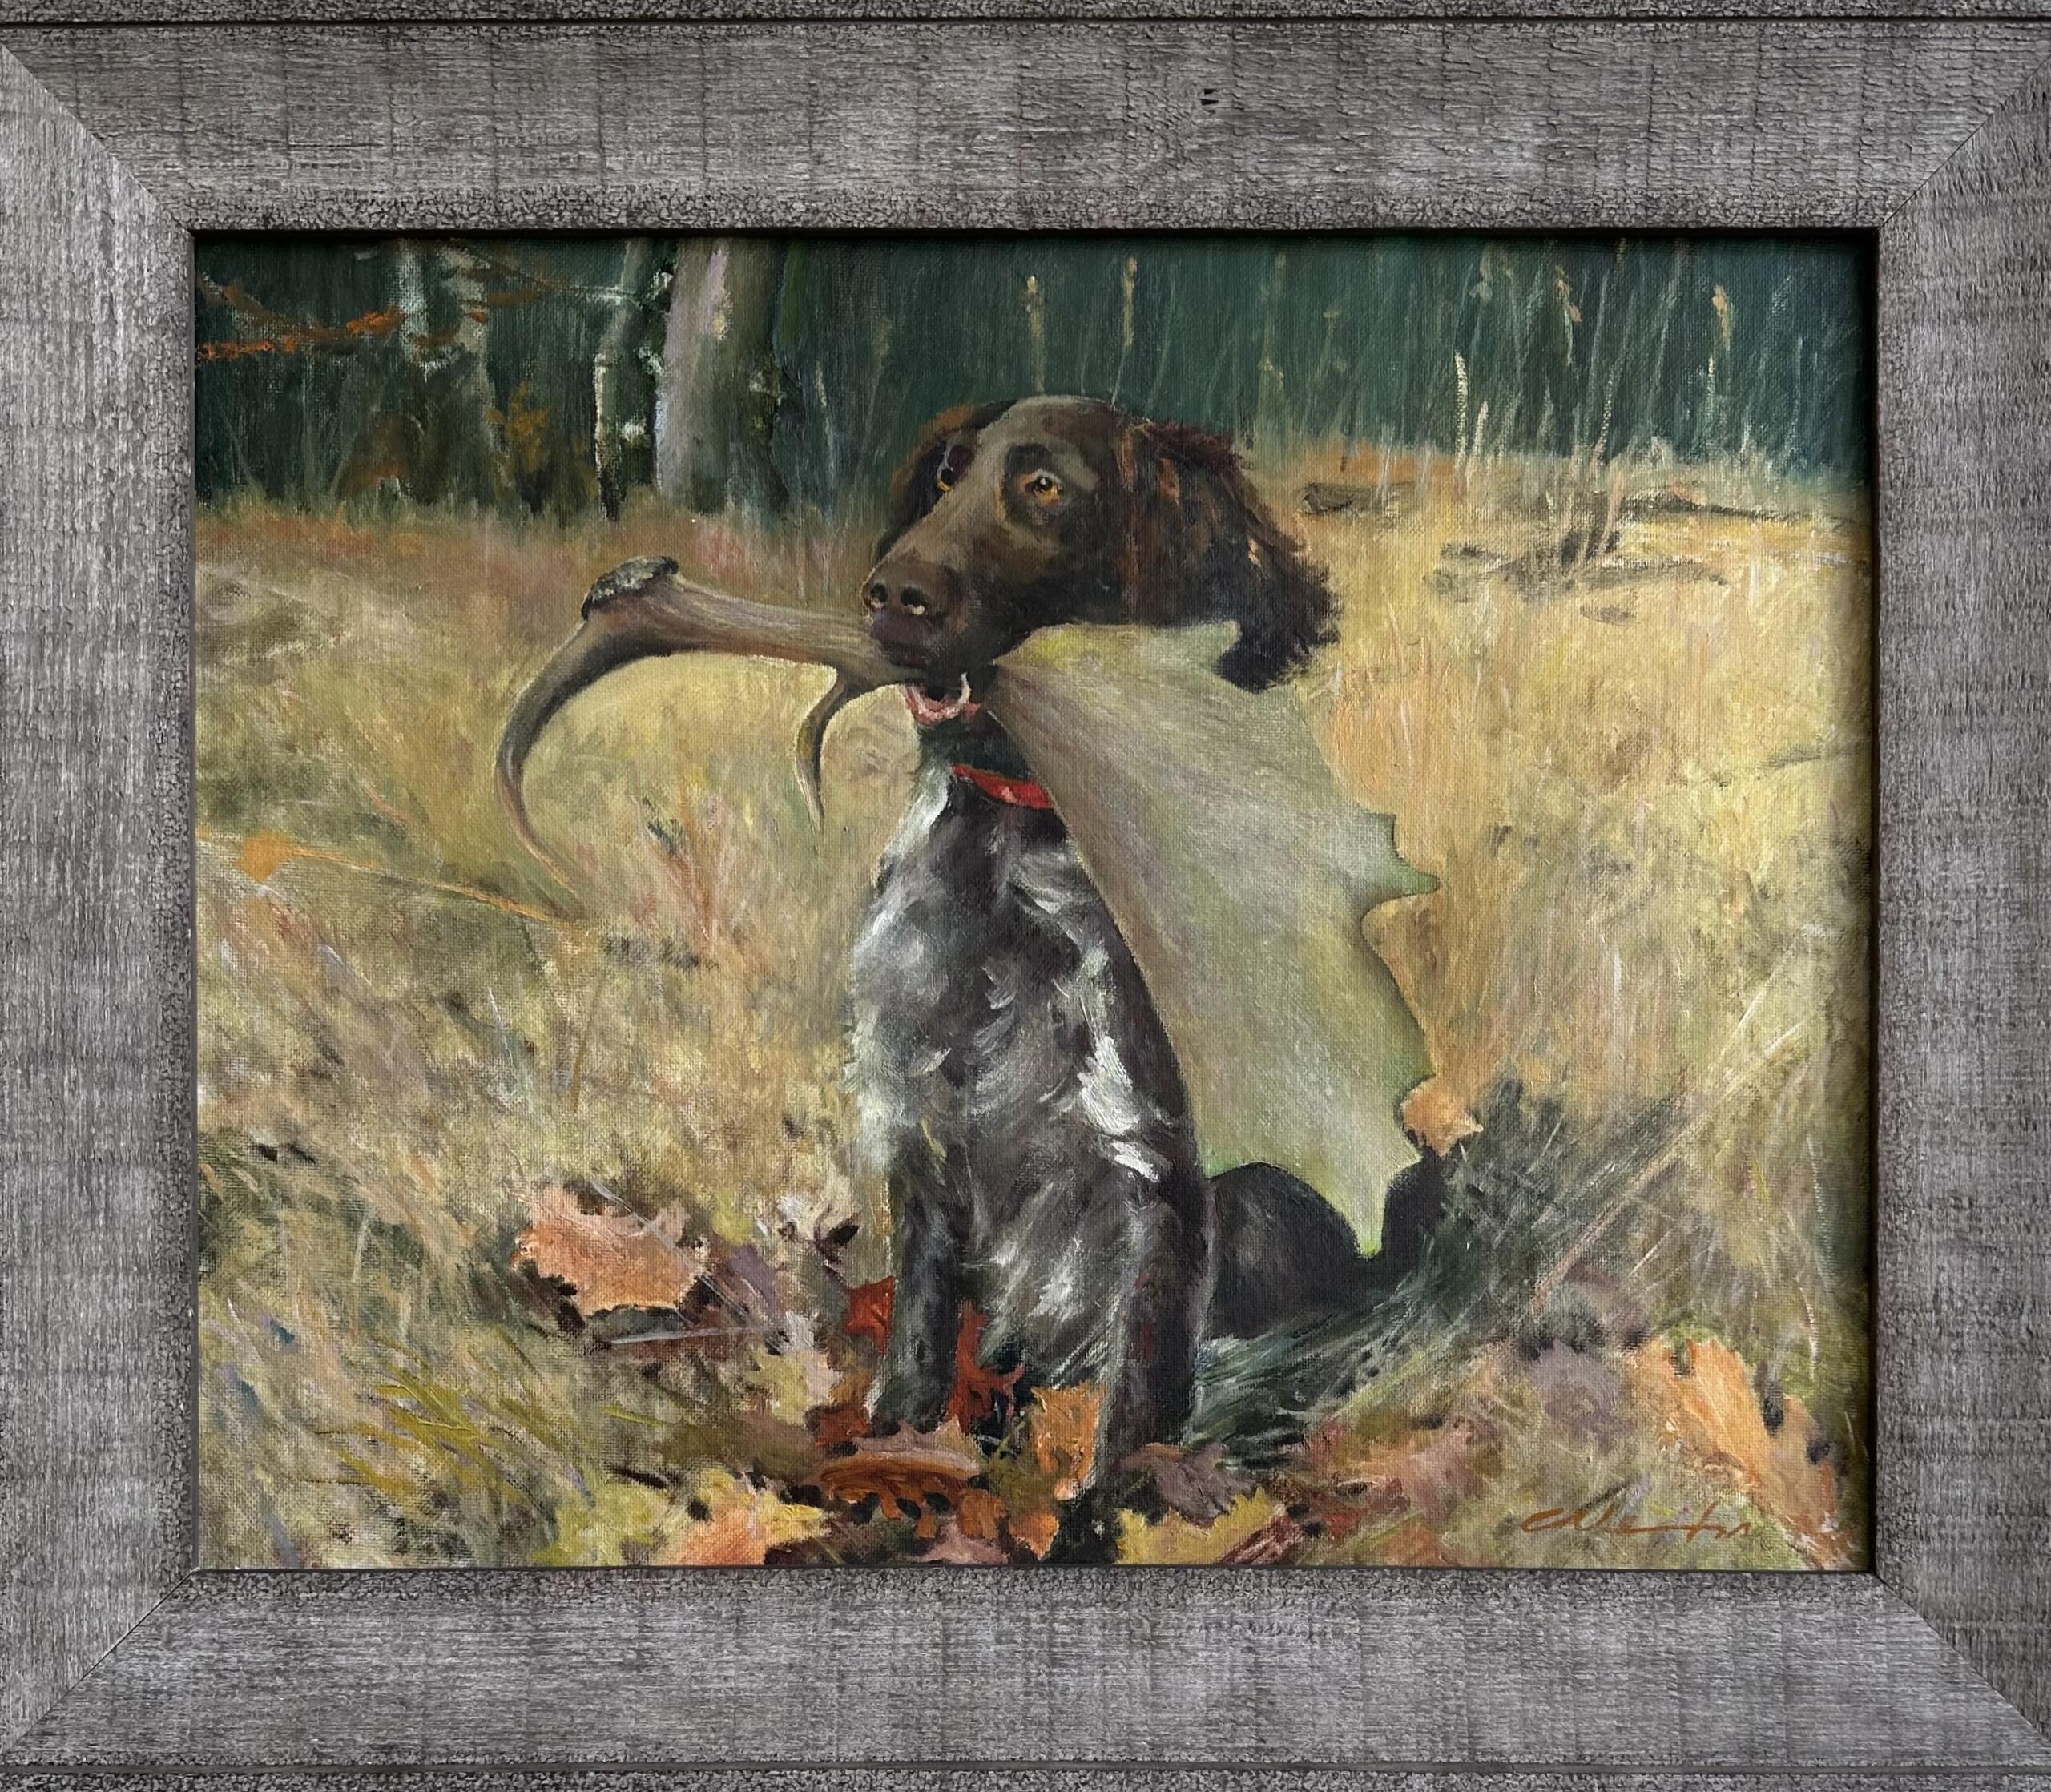 "The Found Shed Antler" in a wooden frame with a clear grain, tinted gray.